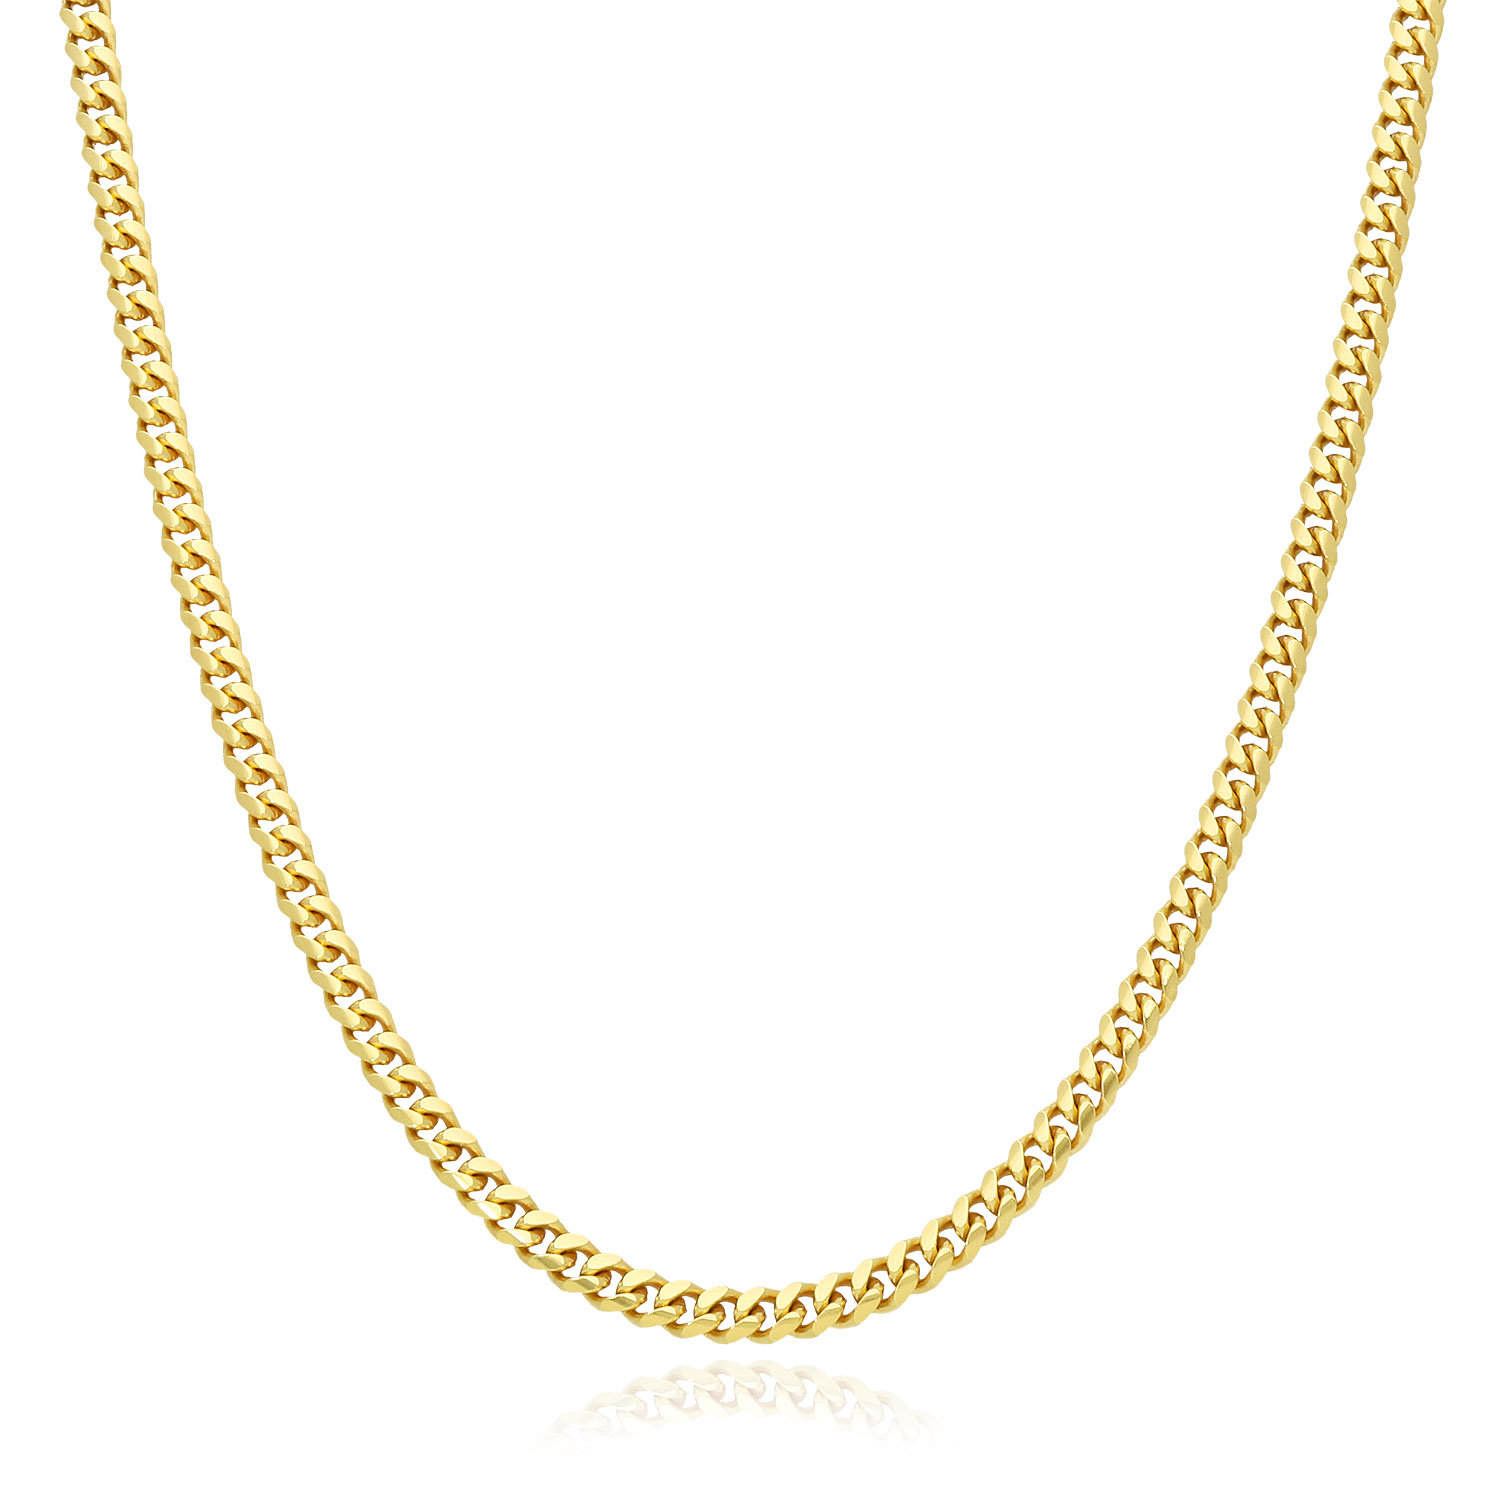 Solid 14K Yellow Gold Over Silver 3.5mm Miami Cuban Chain Necklace 16"-30" - 30"